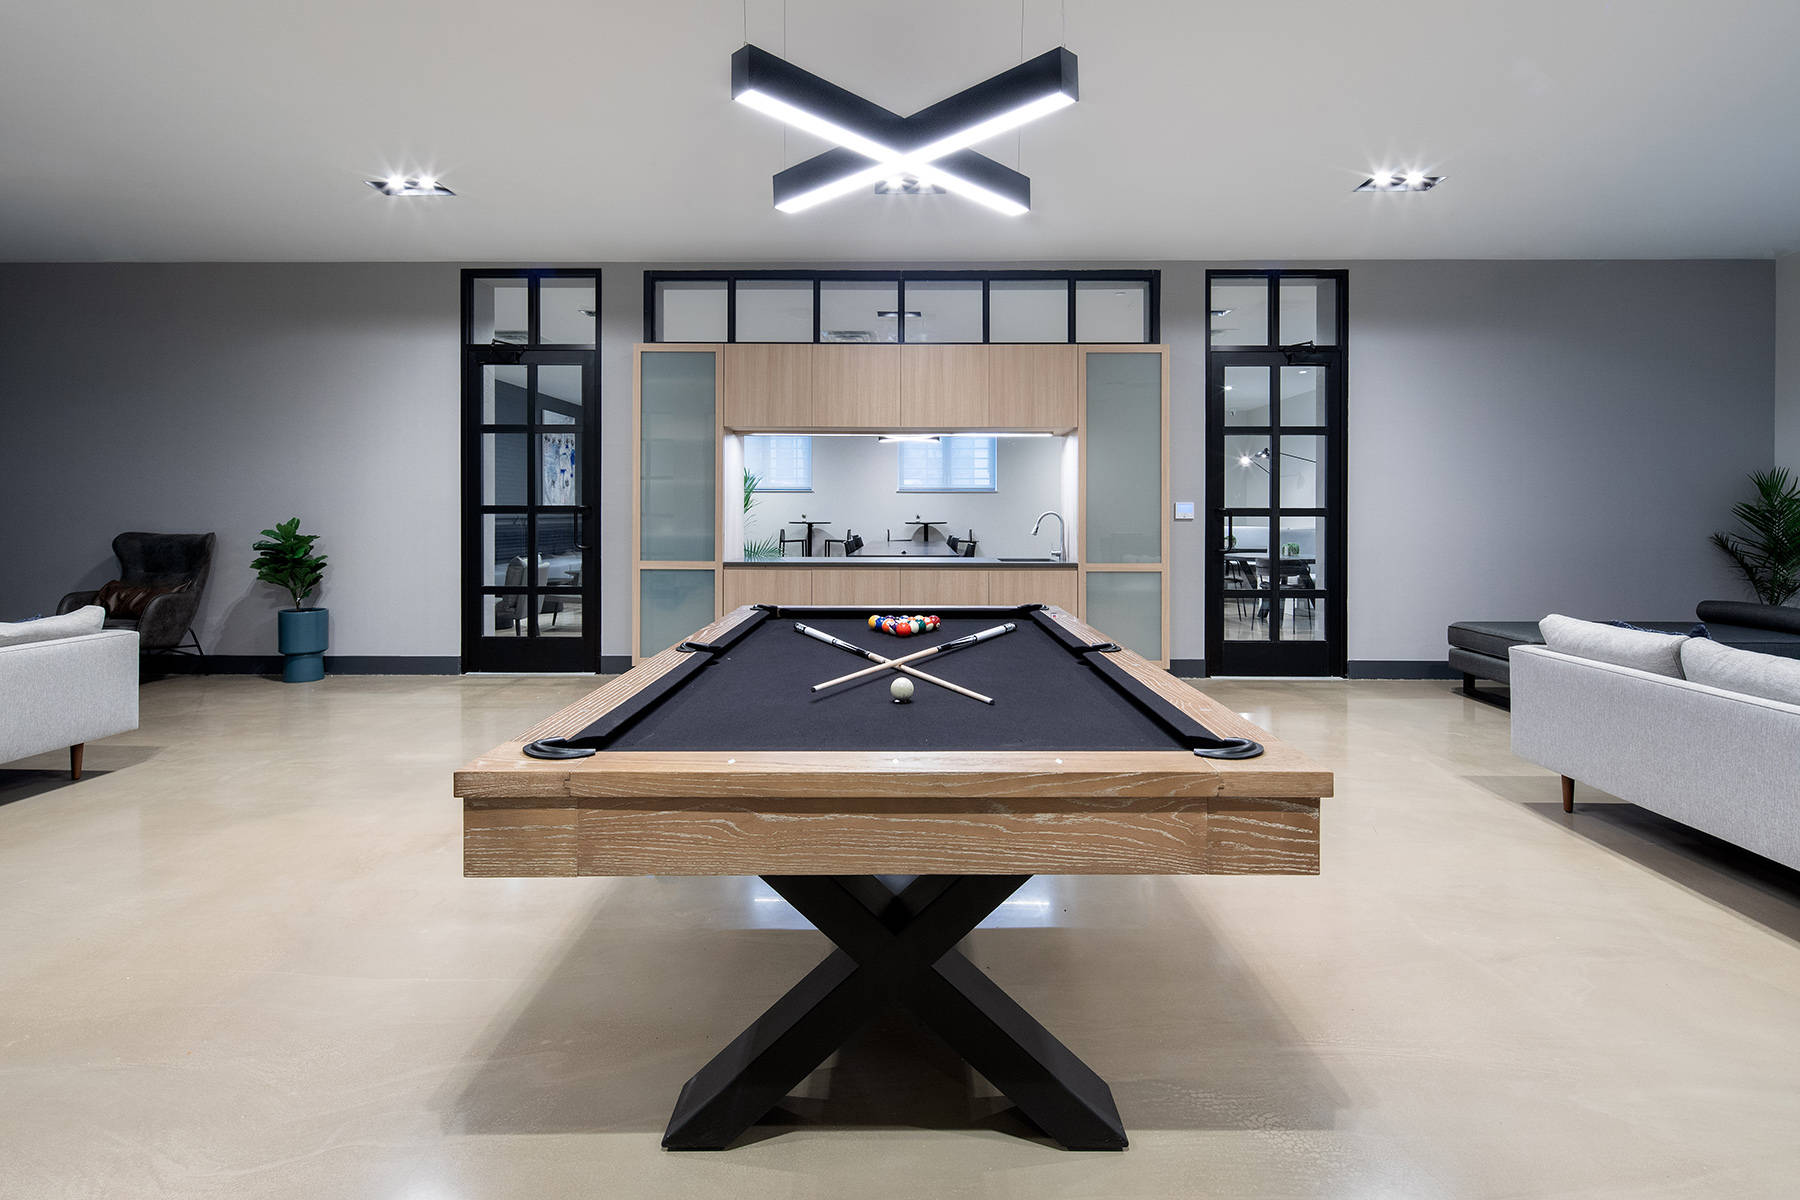 Game room with modern billiards table and view of kitchen behind it